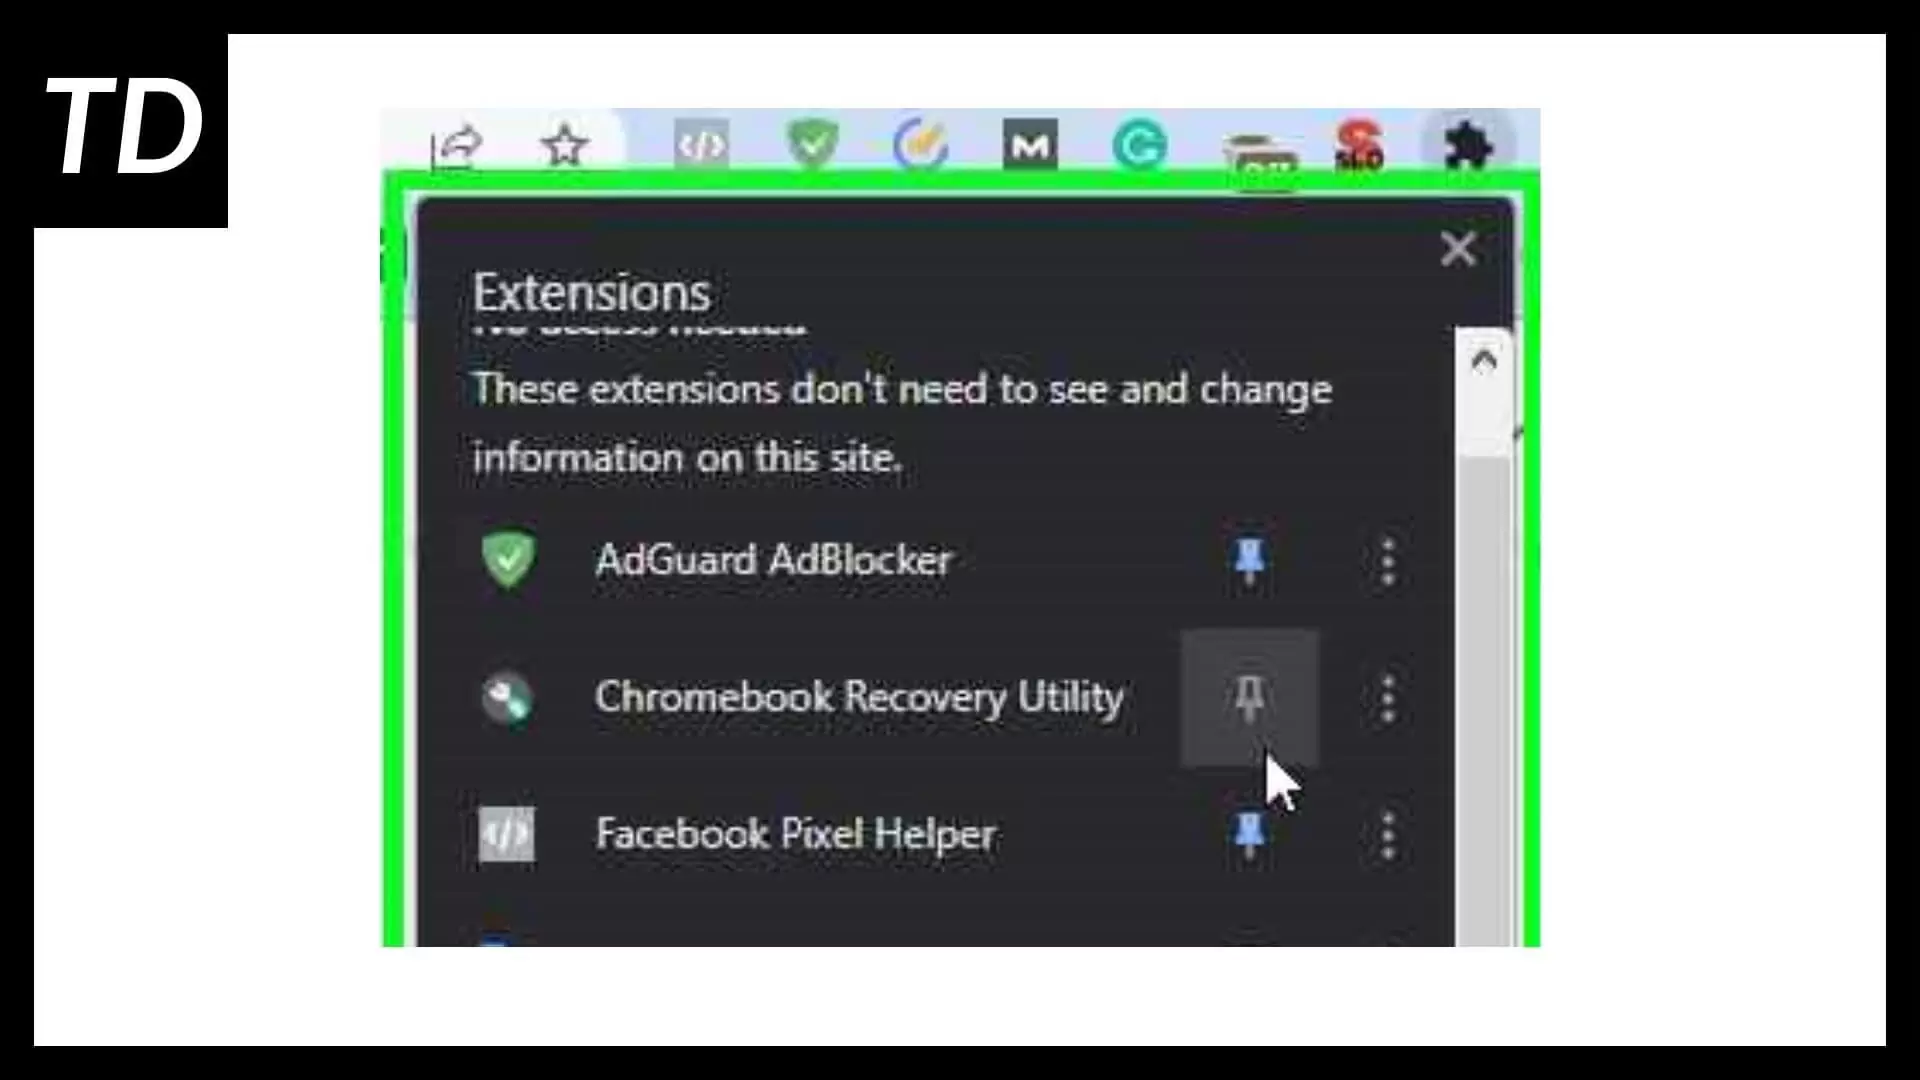 Extension menu showing all the installed extensions including Chrome Recovery Utility